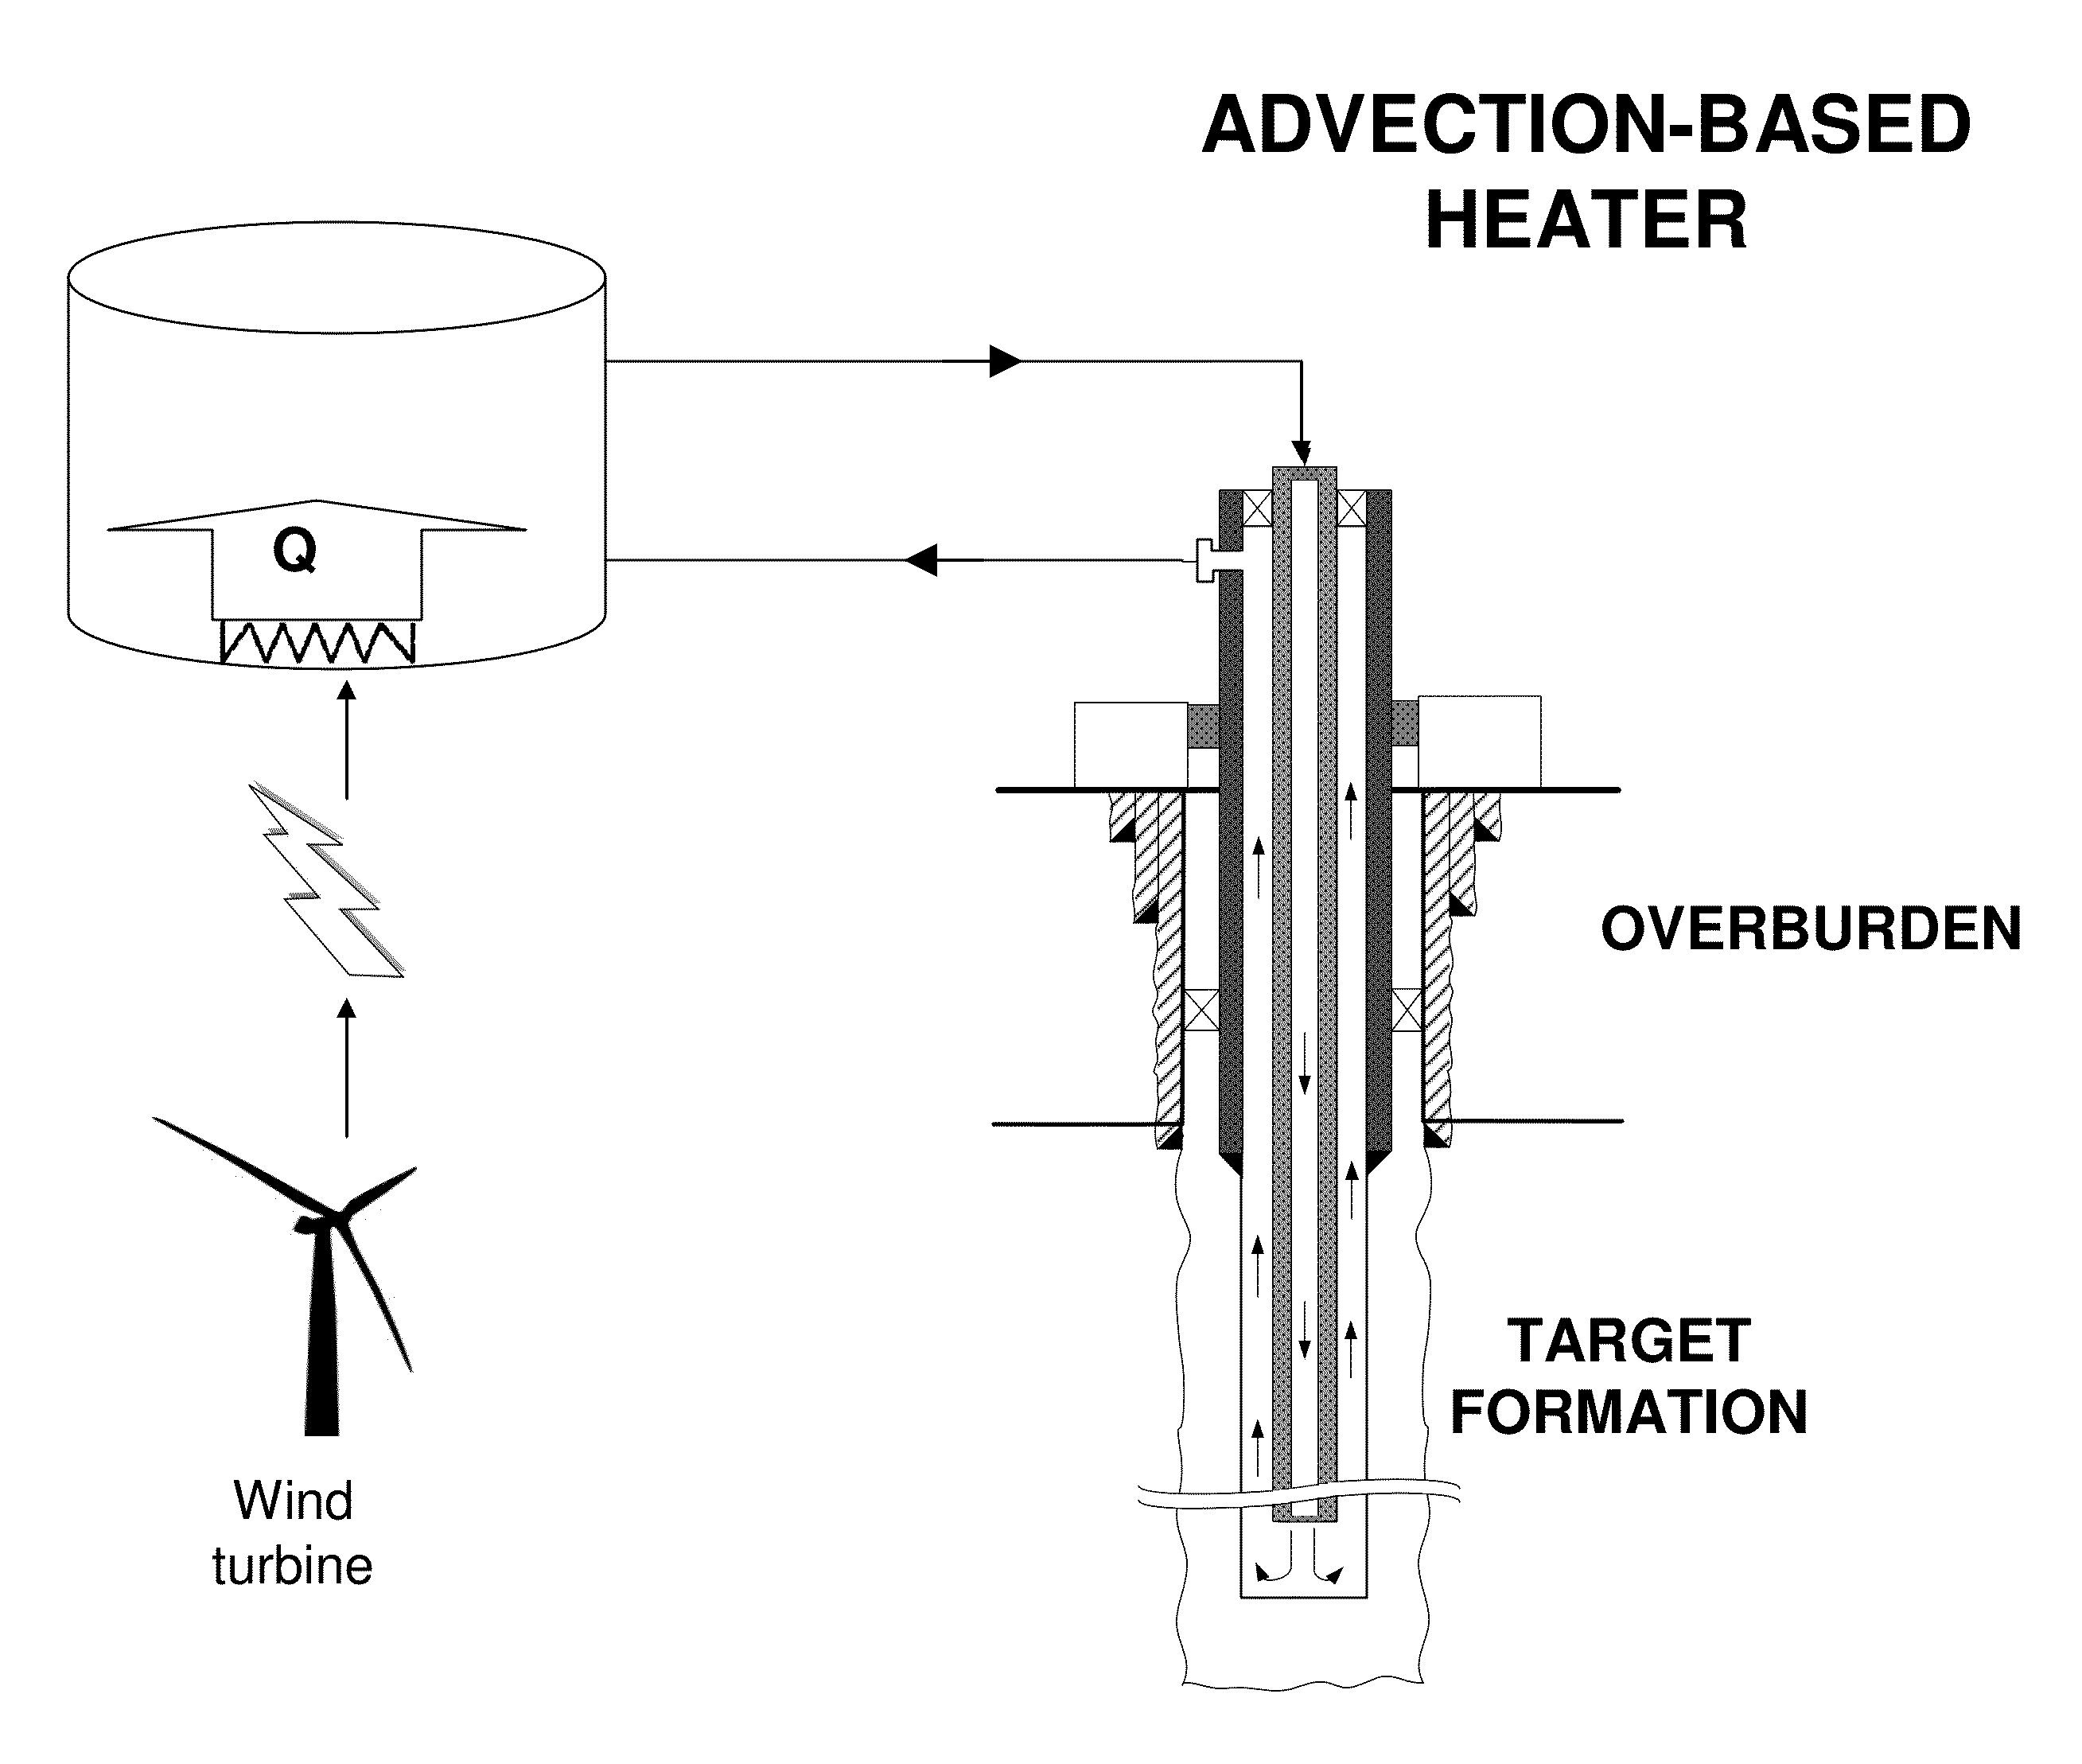 Heater pattern including heaters powered by wind-electricity for in situ thermal processing of a subsurface hydrocarbon-containing formation